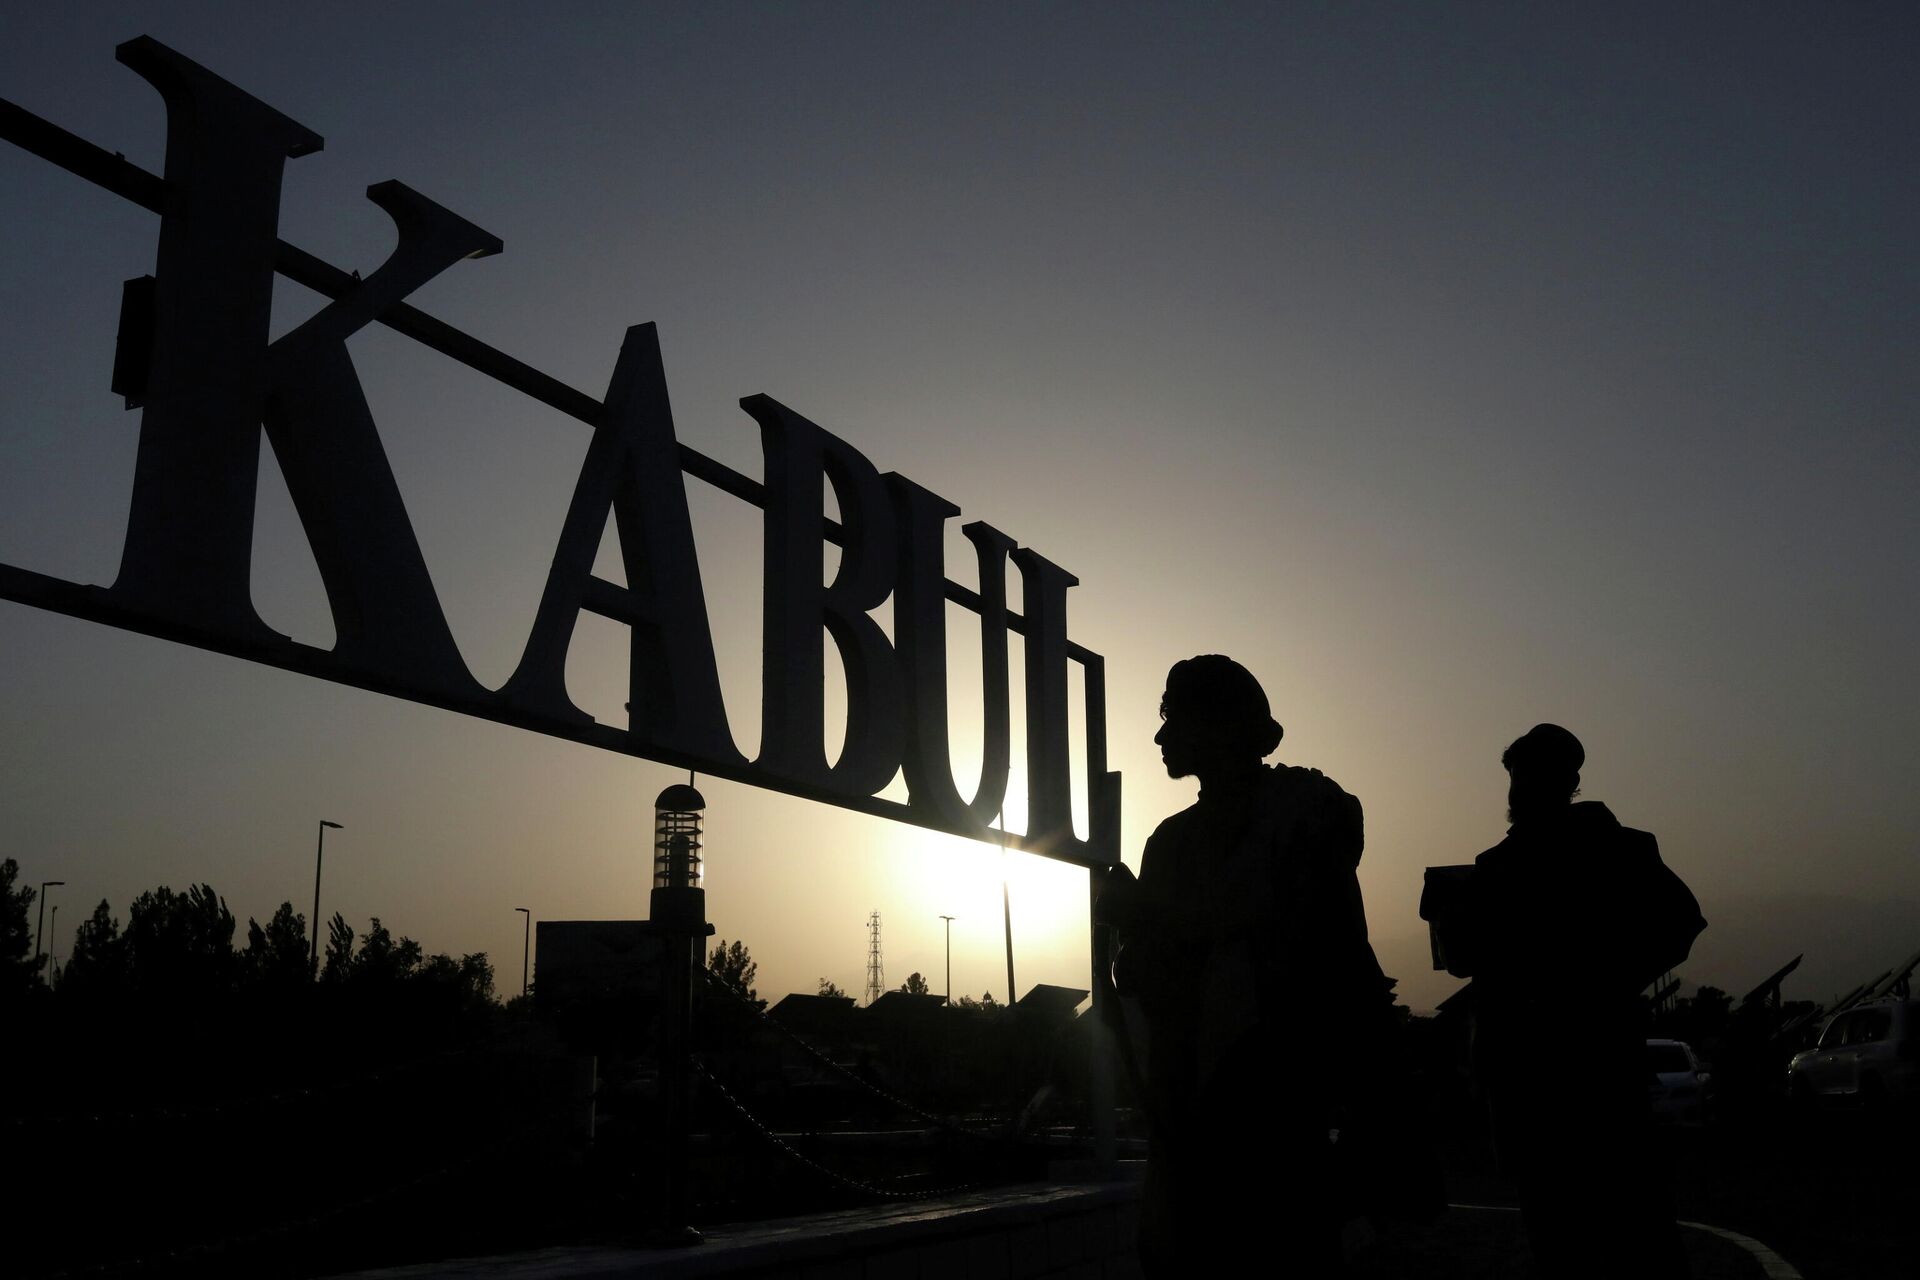 Taliban soldiers stand in front of a sign at the international airport in Kabul, Afghanistan, September 9, 2021 - Sputnik International, 1920, 29.09.2021